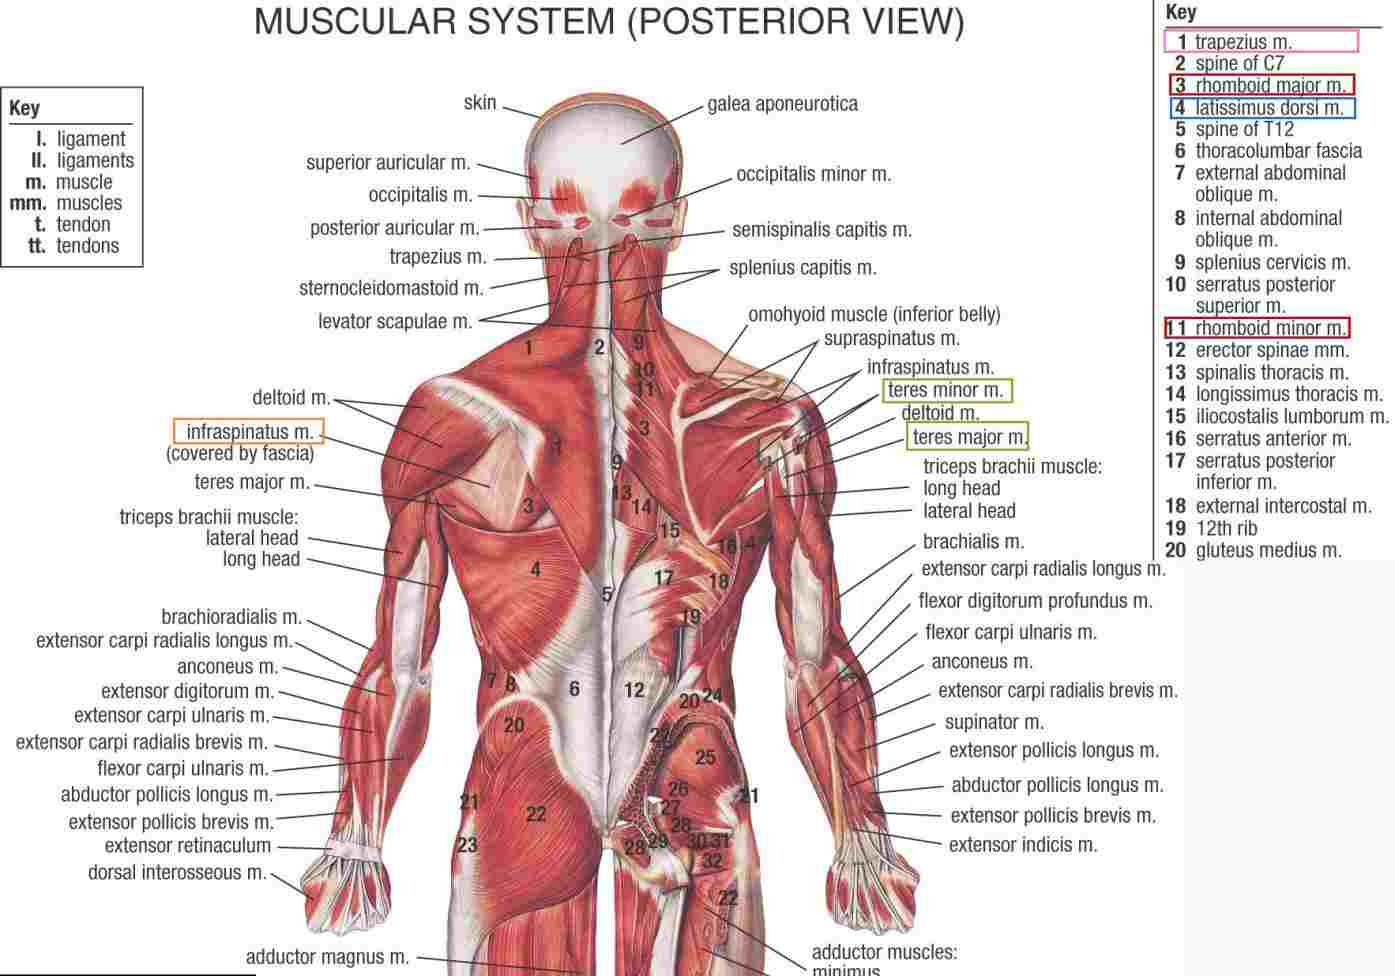 Human Muscle Diagram Hb Human Muscle Anatomy Hip Diagram Muscular System Posterior View